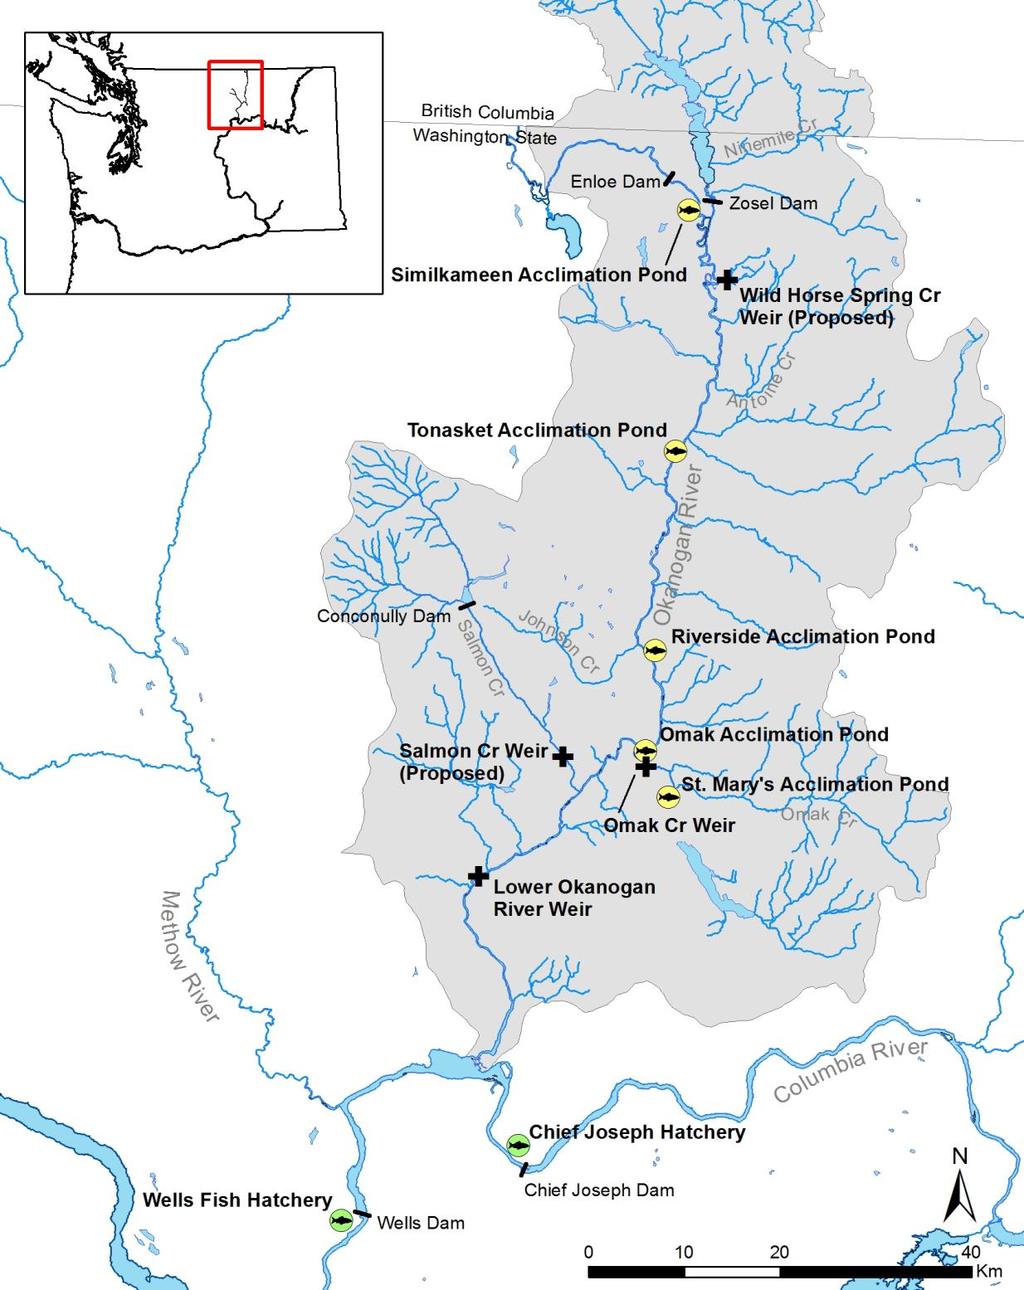 Figure 1. Okanogan basin and its connection to Canada and the Columbia River through the United States.